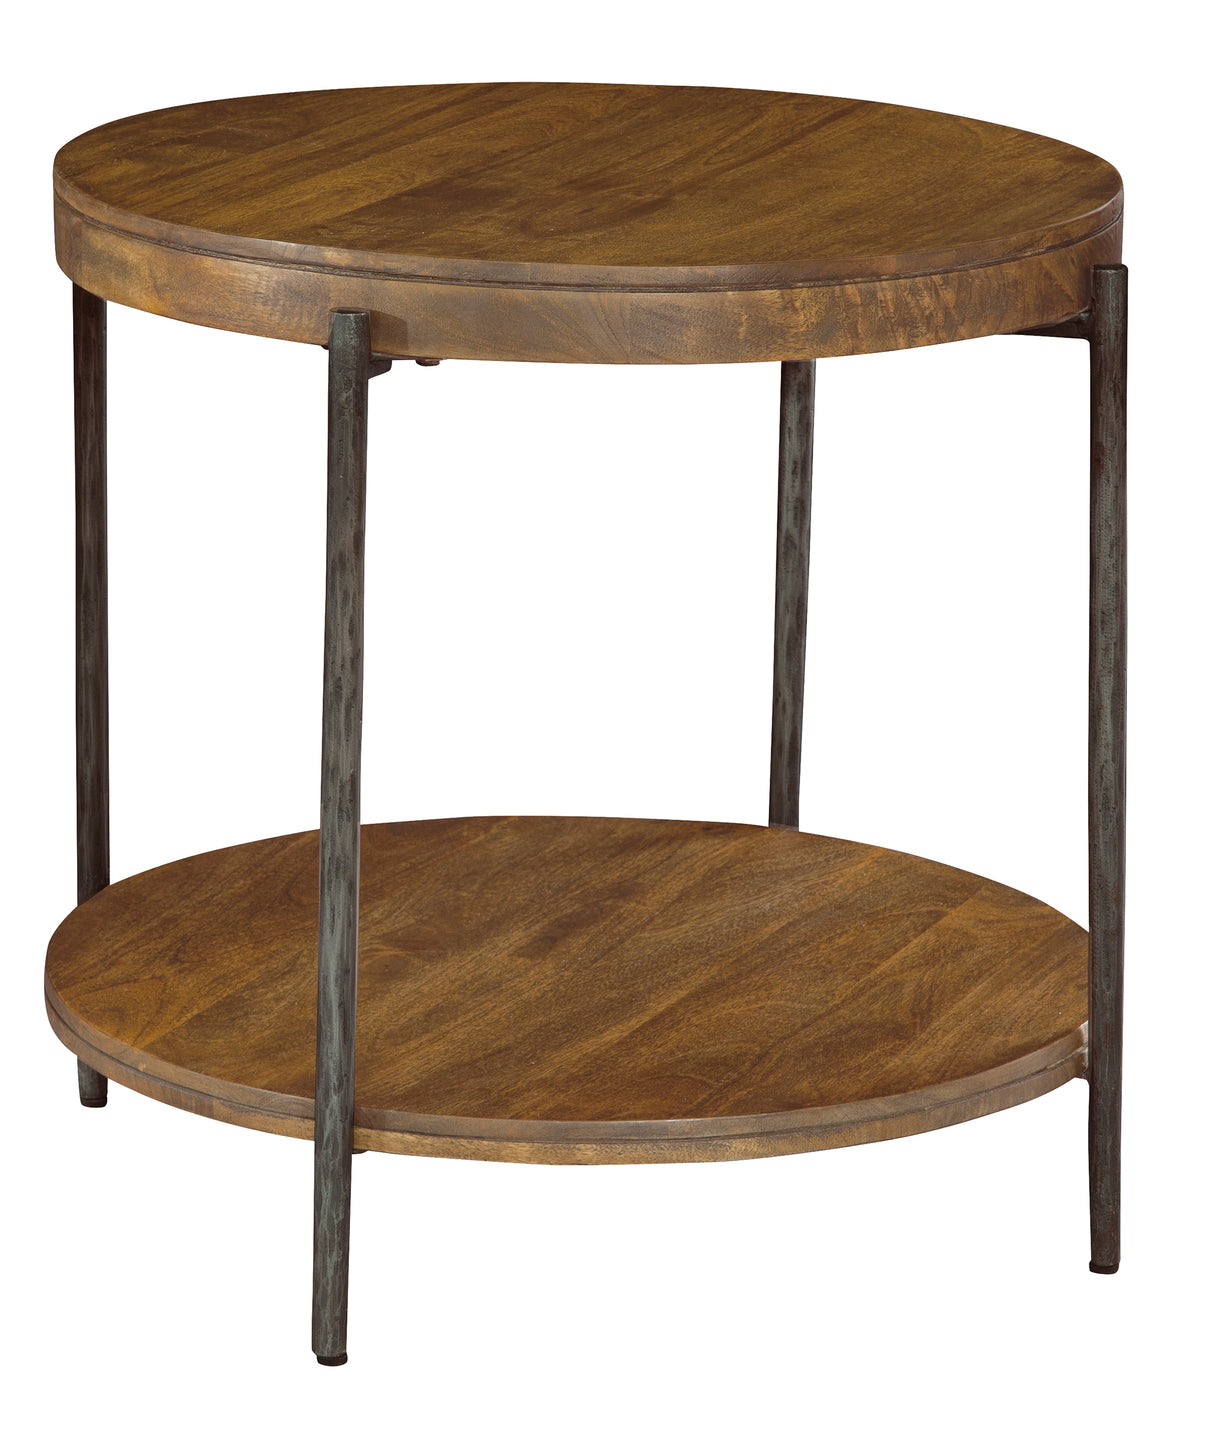 Hekman 23704 Bedford Park 30.25in. x 30.25in. x 28.25in. End Table